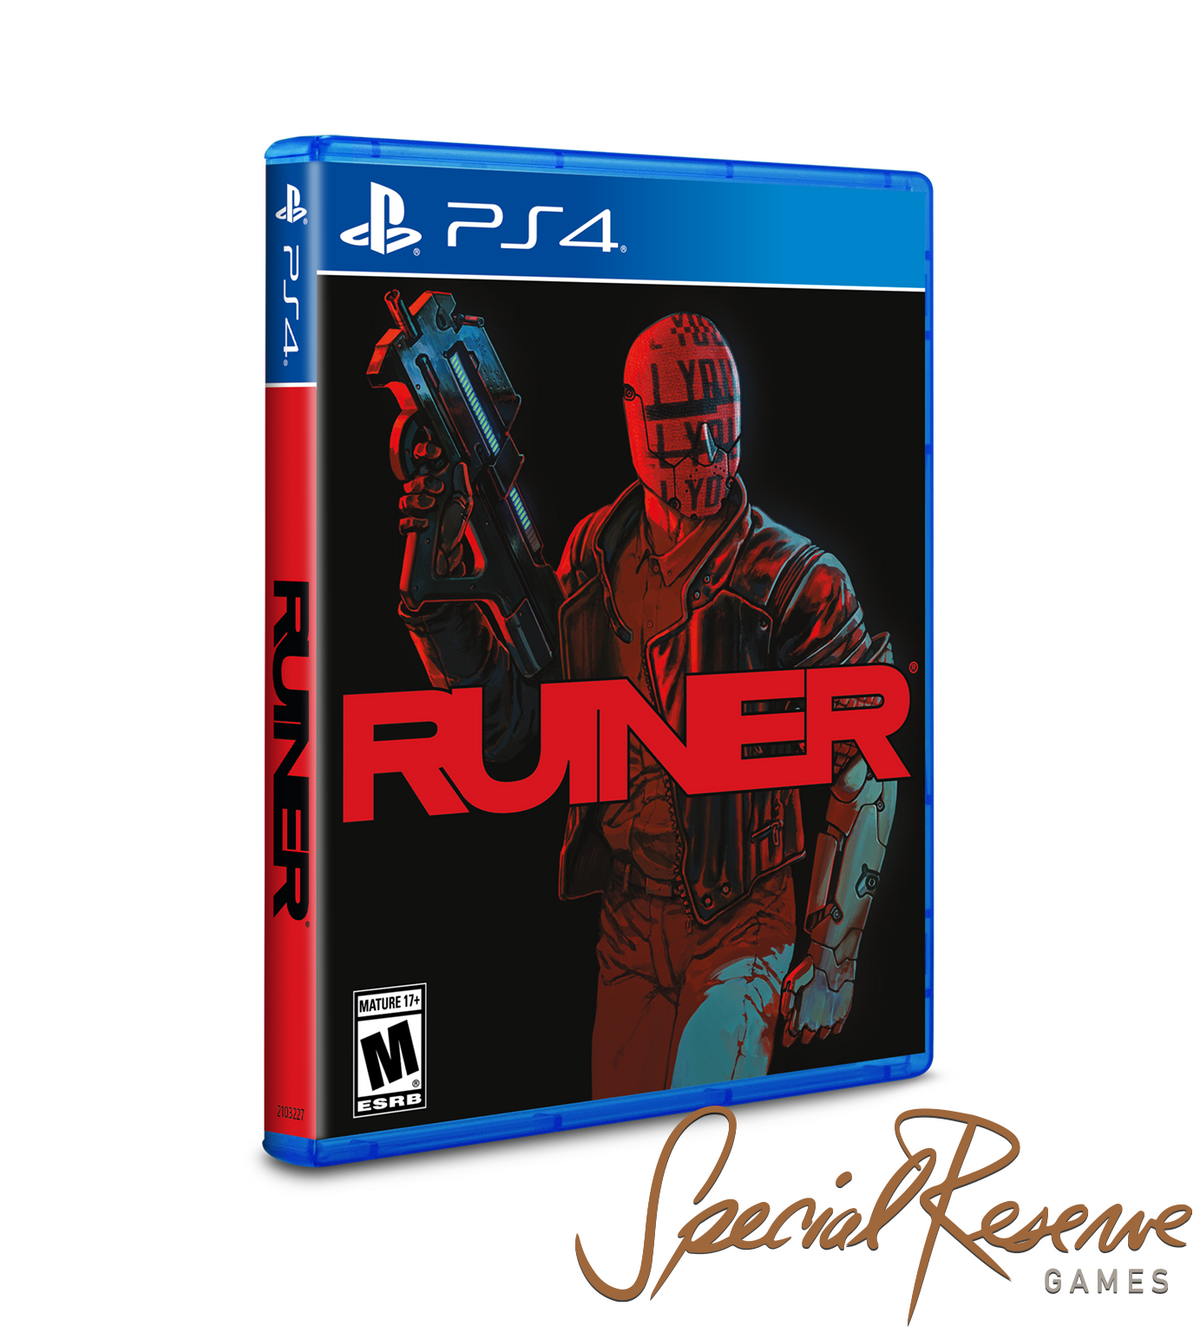 RUINER - Exclusive Variant – Limited Run Games